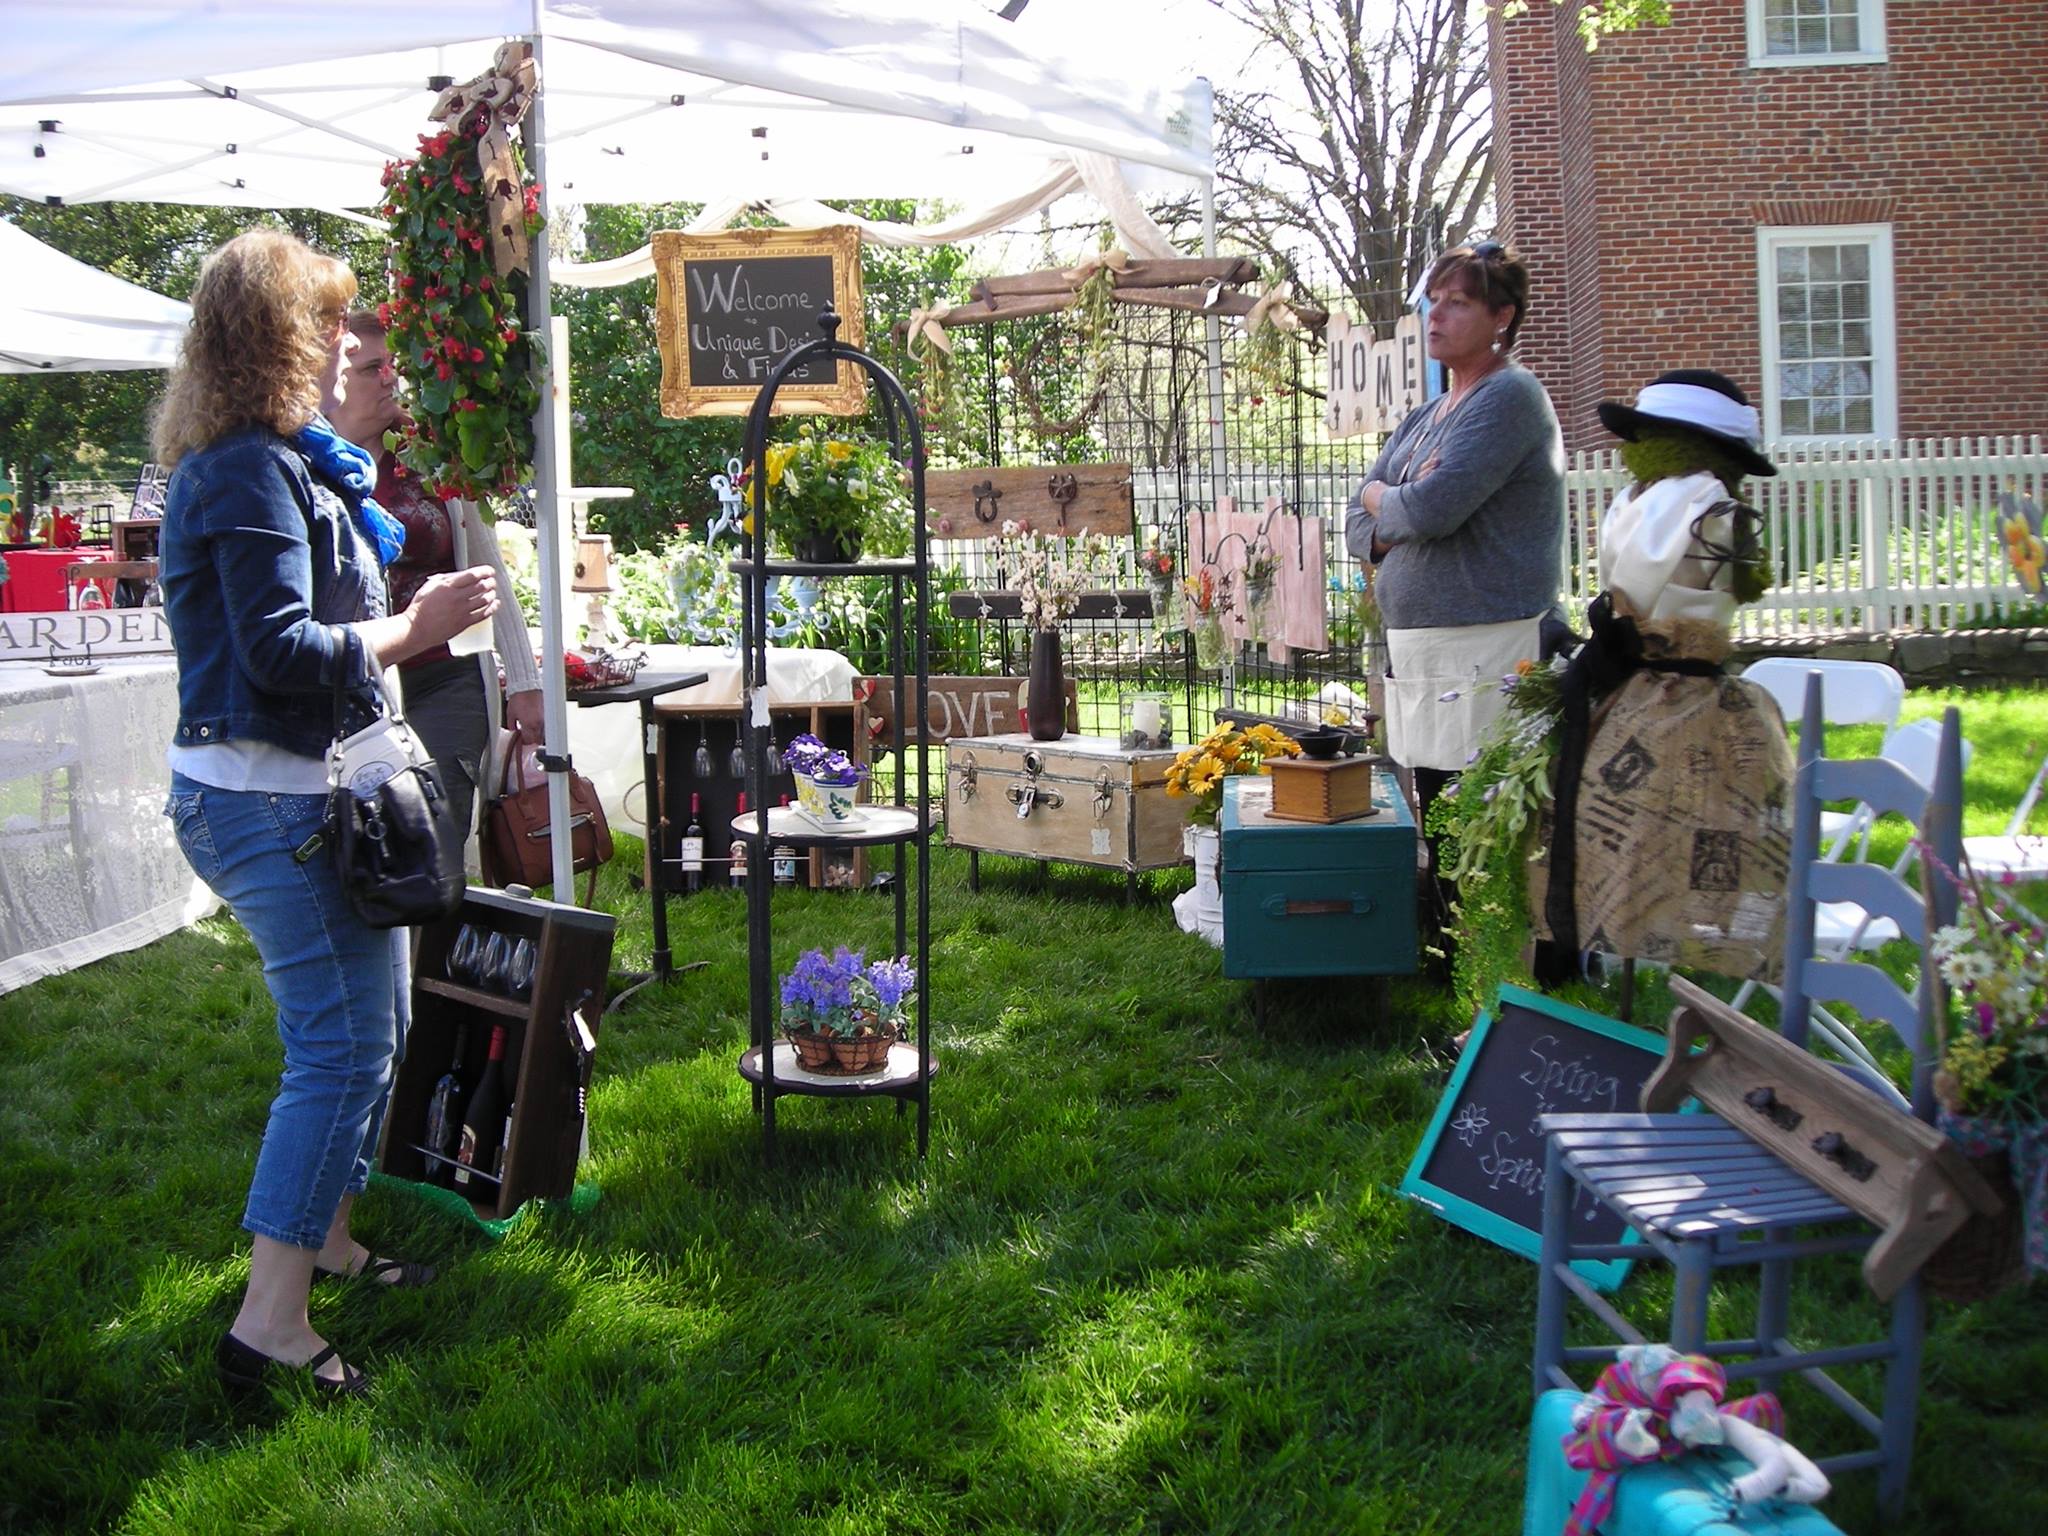 Sappington House Country Craft Fair on Gravois Greenway (Grant's Trail